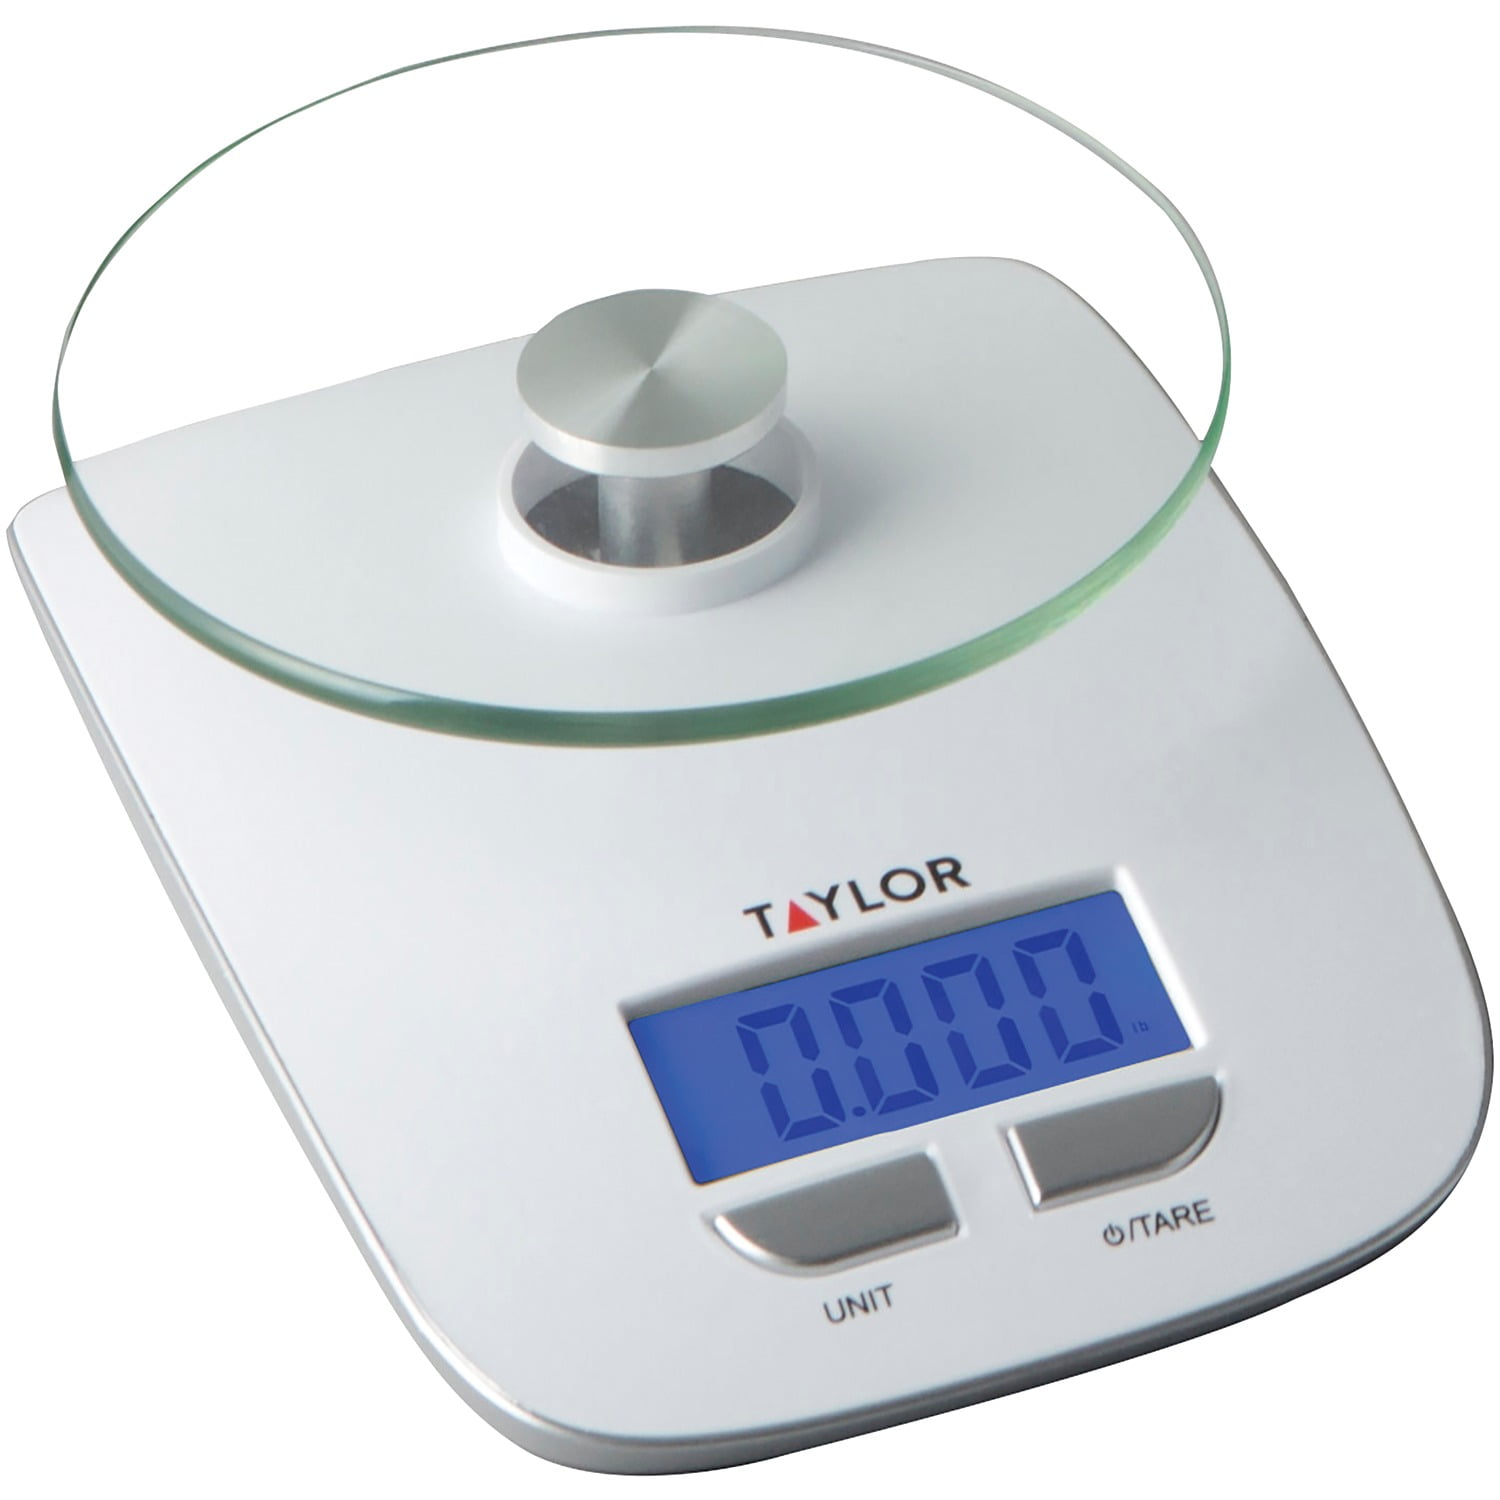  Taylor Digital Kitchen Scale with Glass Platform, Tare